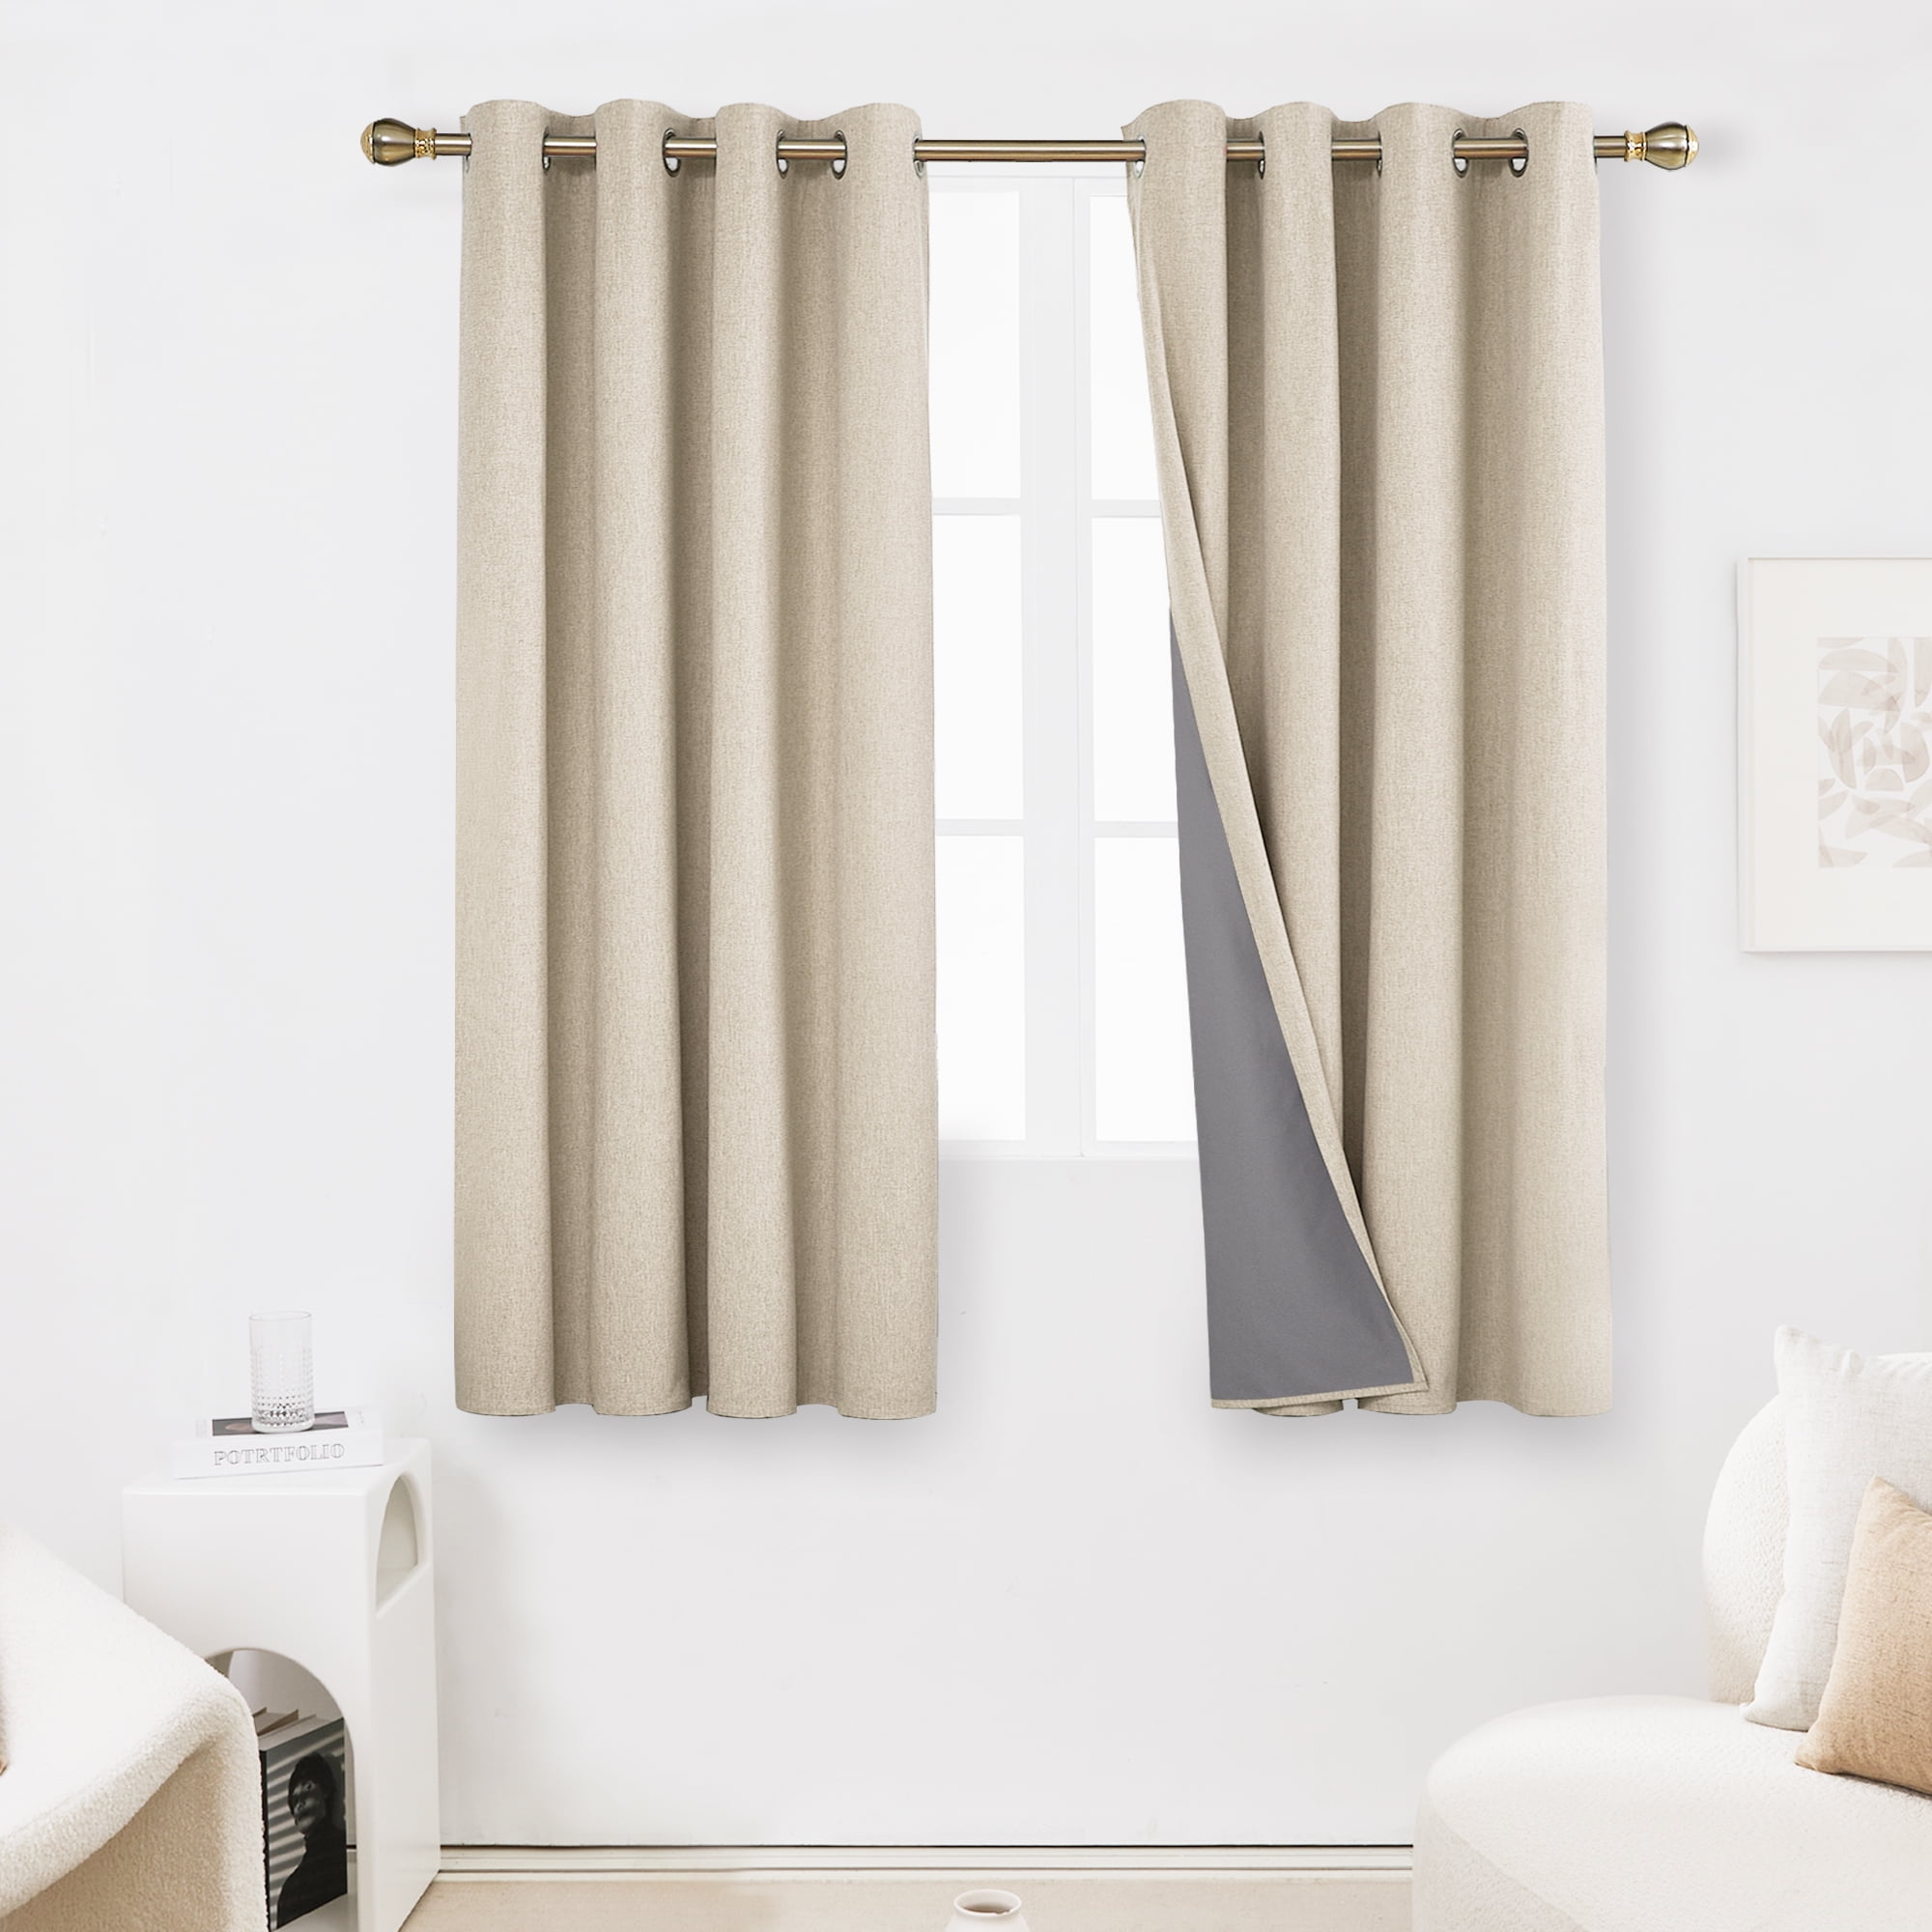 KoTing Gold Curtains for Living Room Gold Blackout Bedroom Drapes